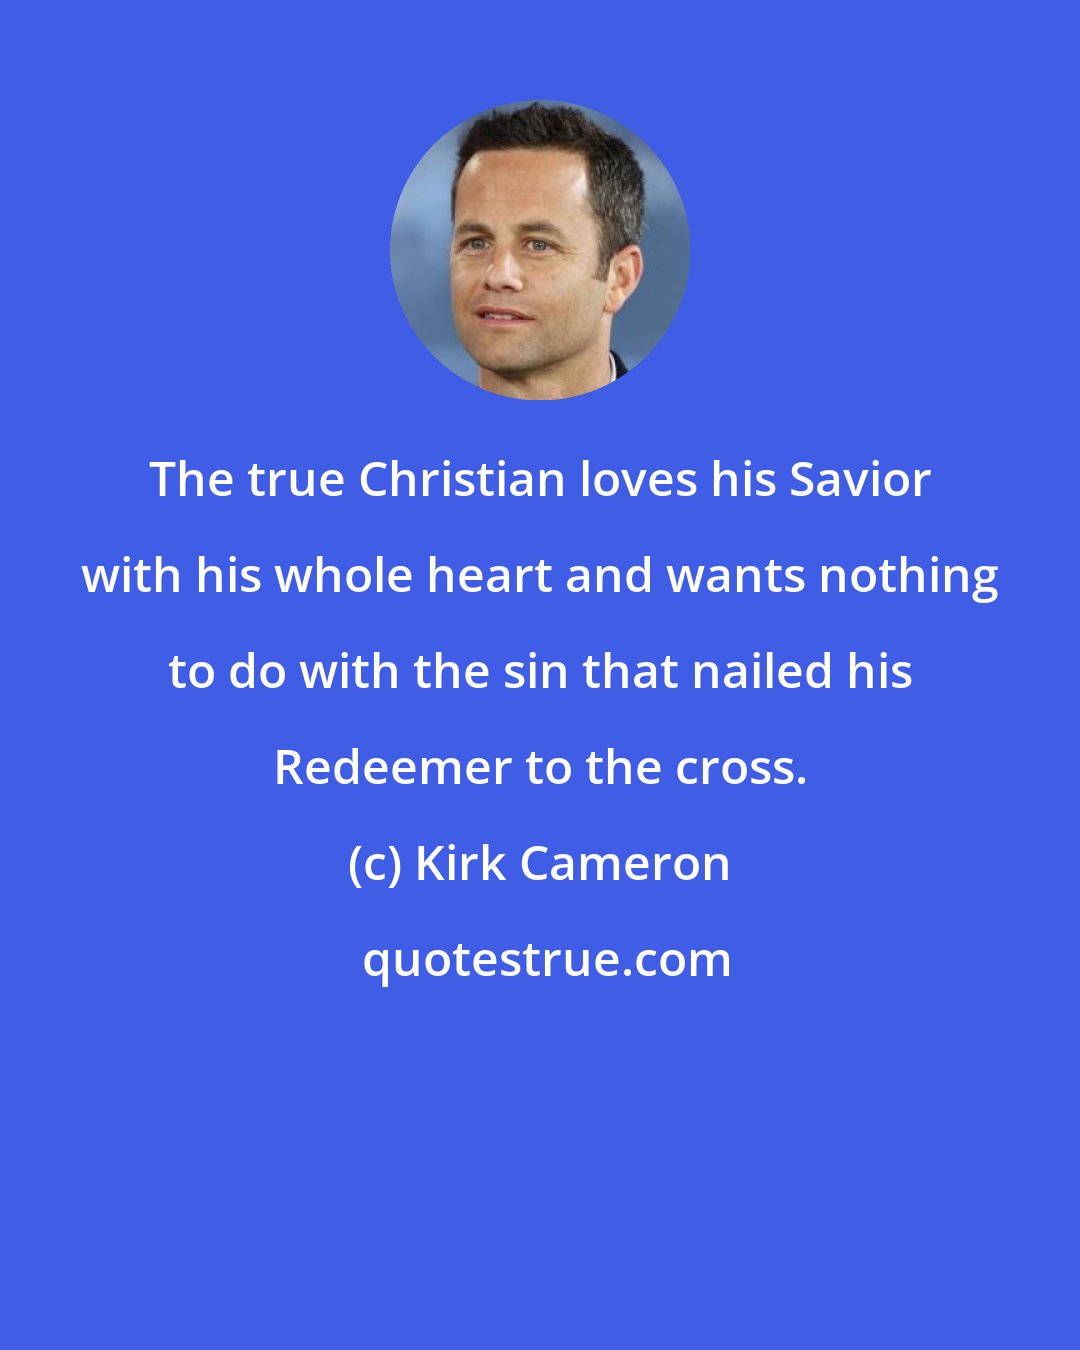 Kirk Cameron: The true Christian loves his Savior with his whole heart and wants nothing to do with the sin that nailed his Redeemer to the cross.